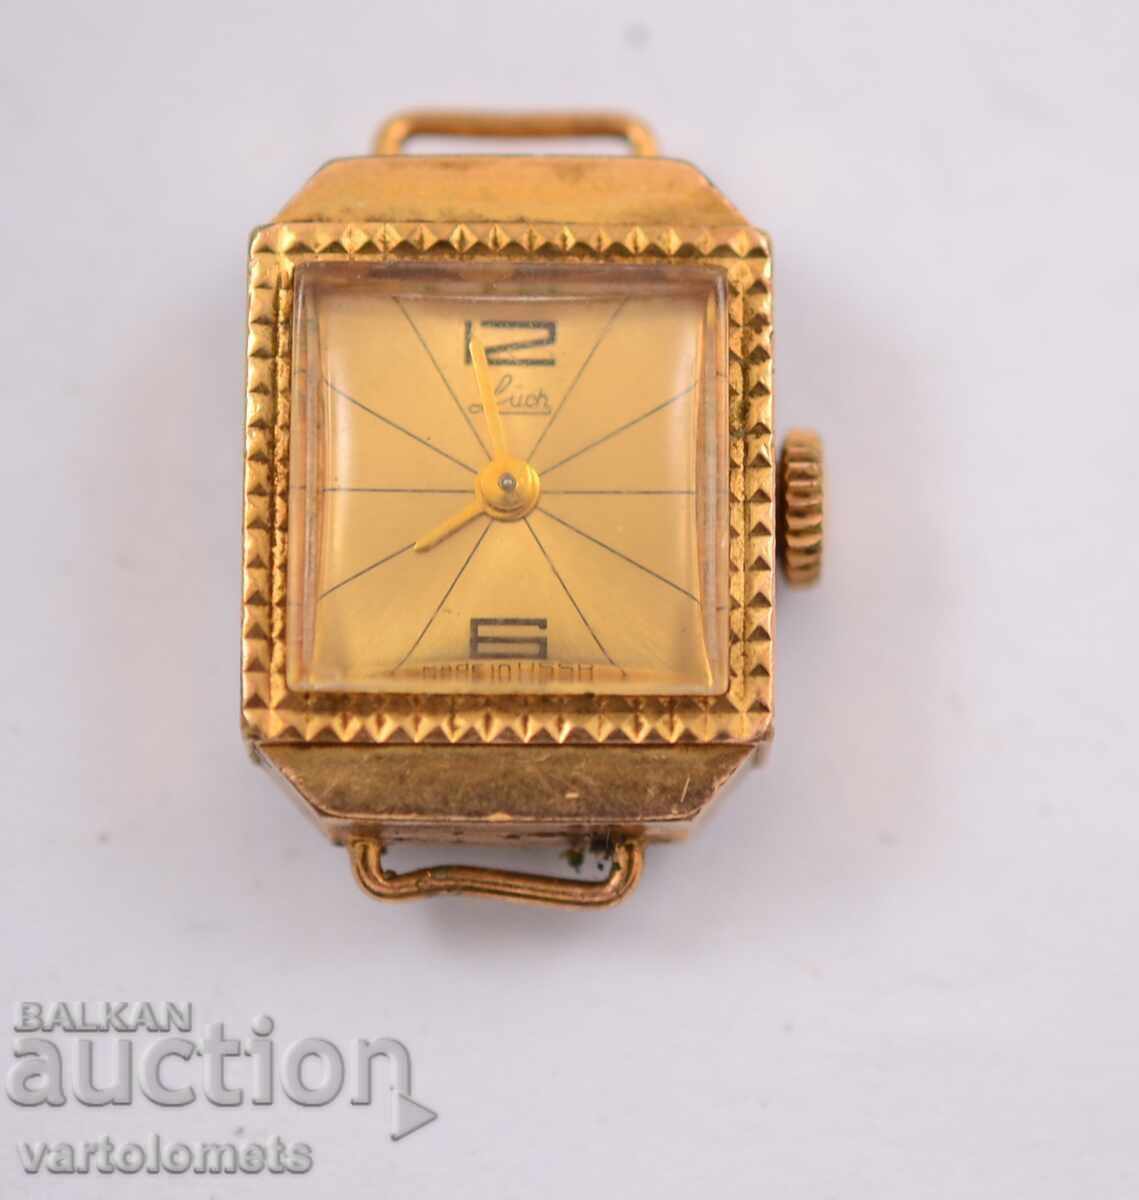 Women's watch USSR BEAM with gold plating 10 Mk - not working